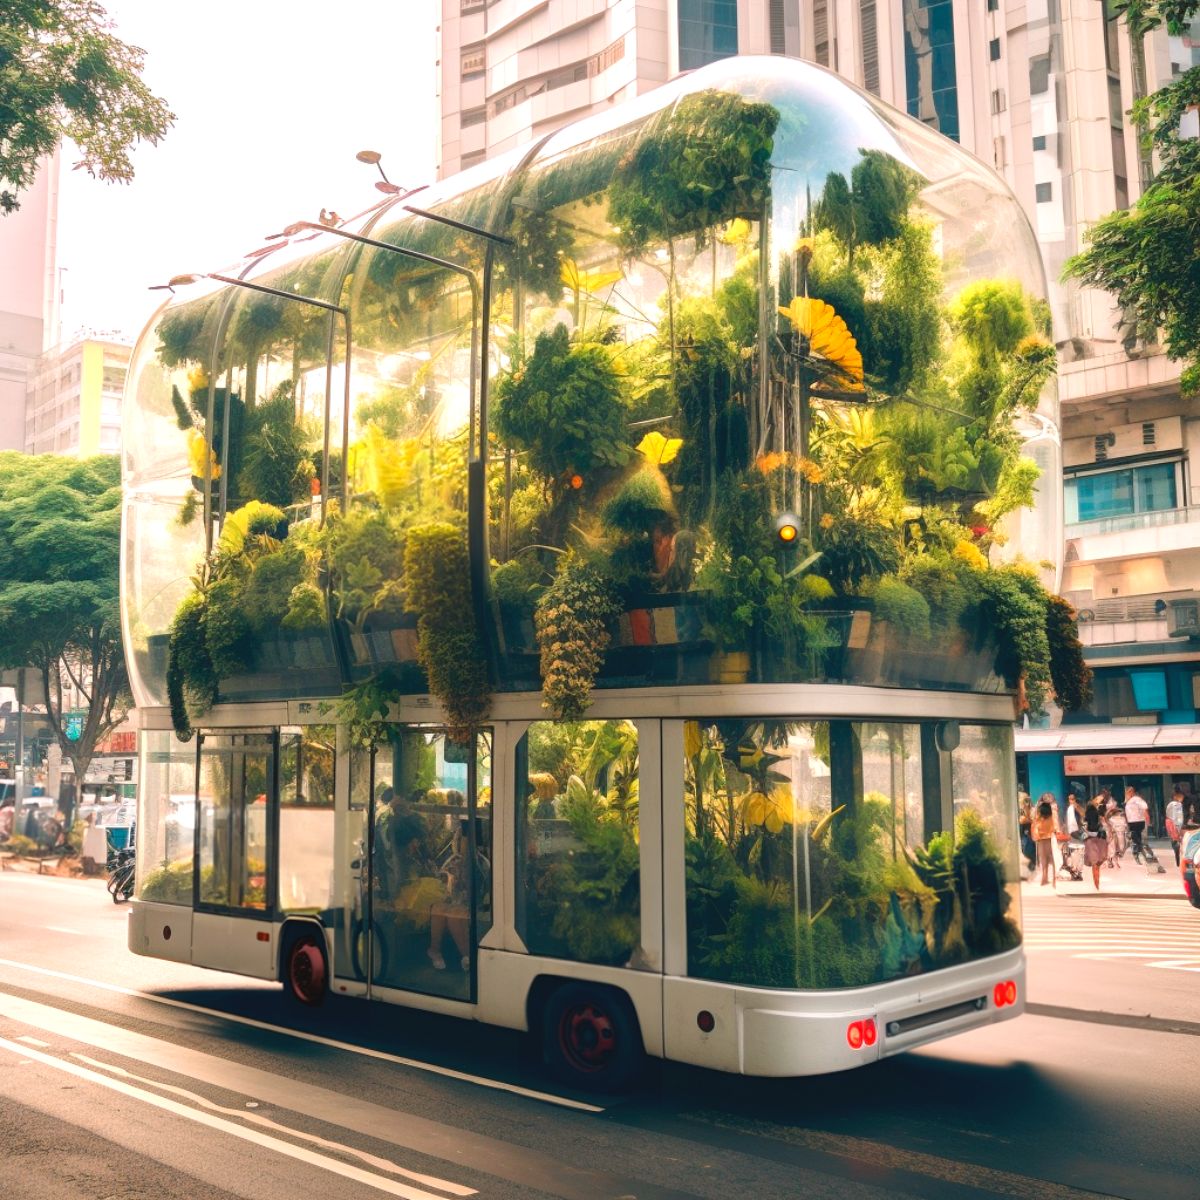 Goal of greenhouse buses is to purify air quality